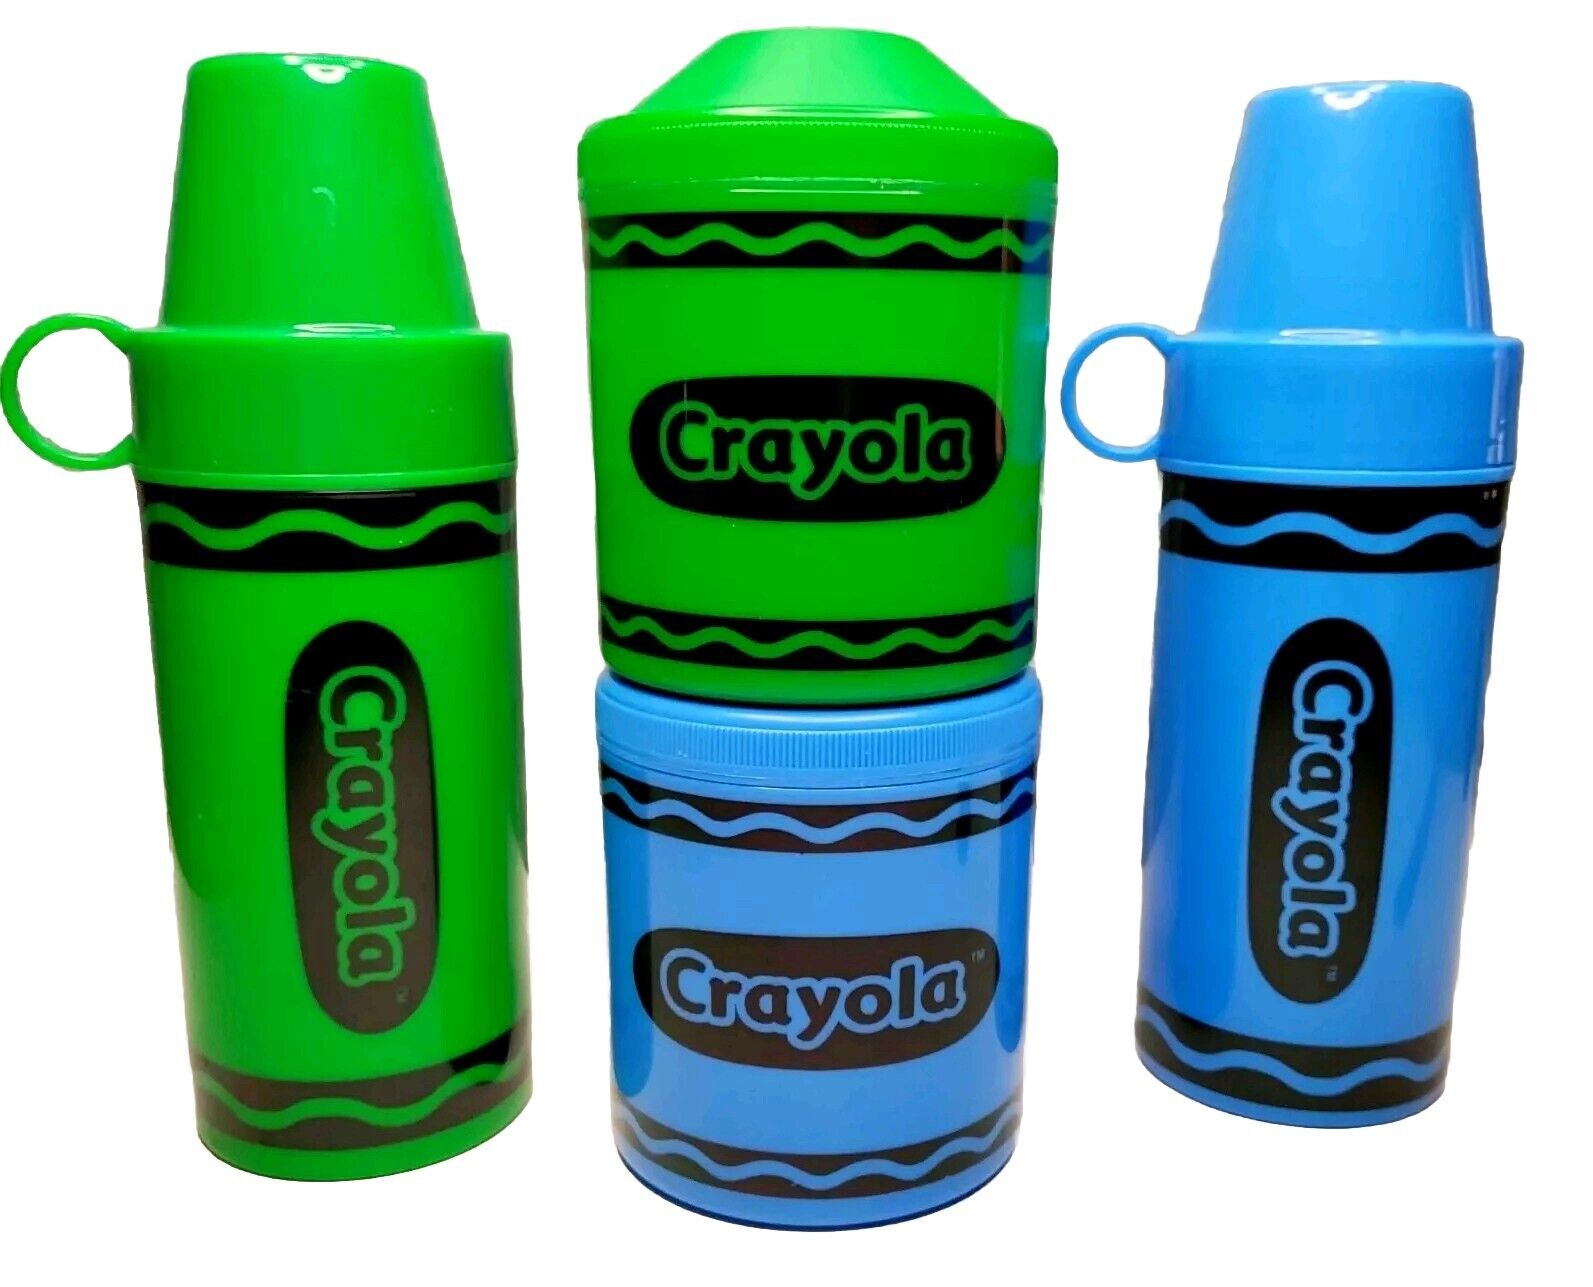 2006 Crayola Crayon Shaped Insulated Food & Drink Containers 4 Pc Set, 10 & 11oz